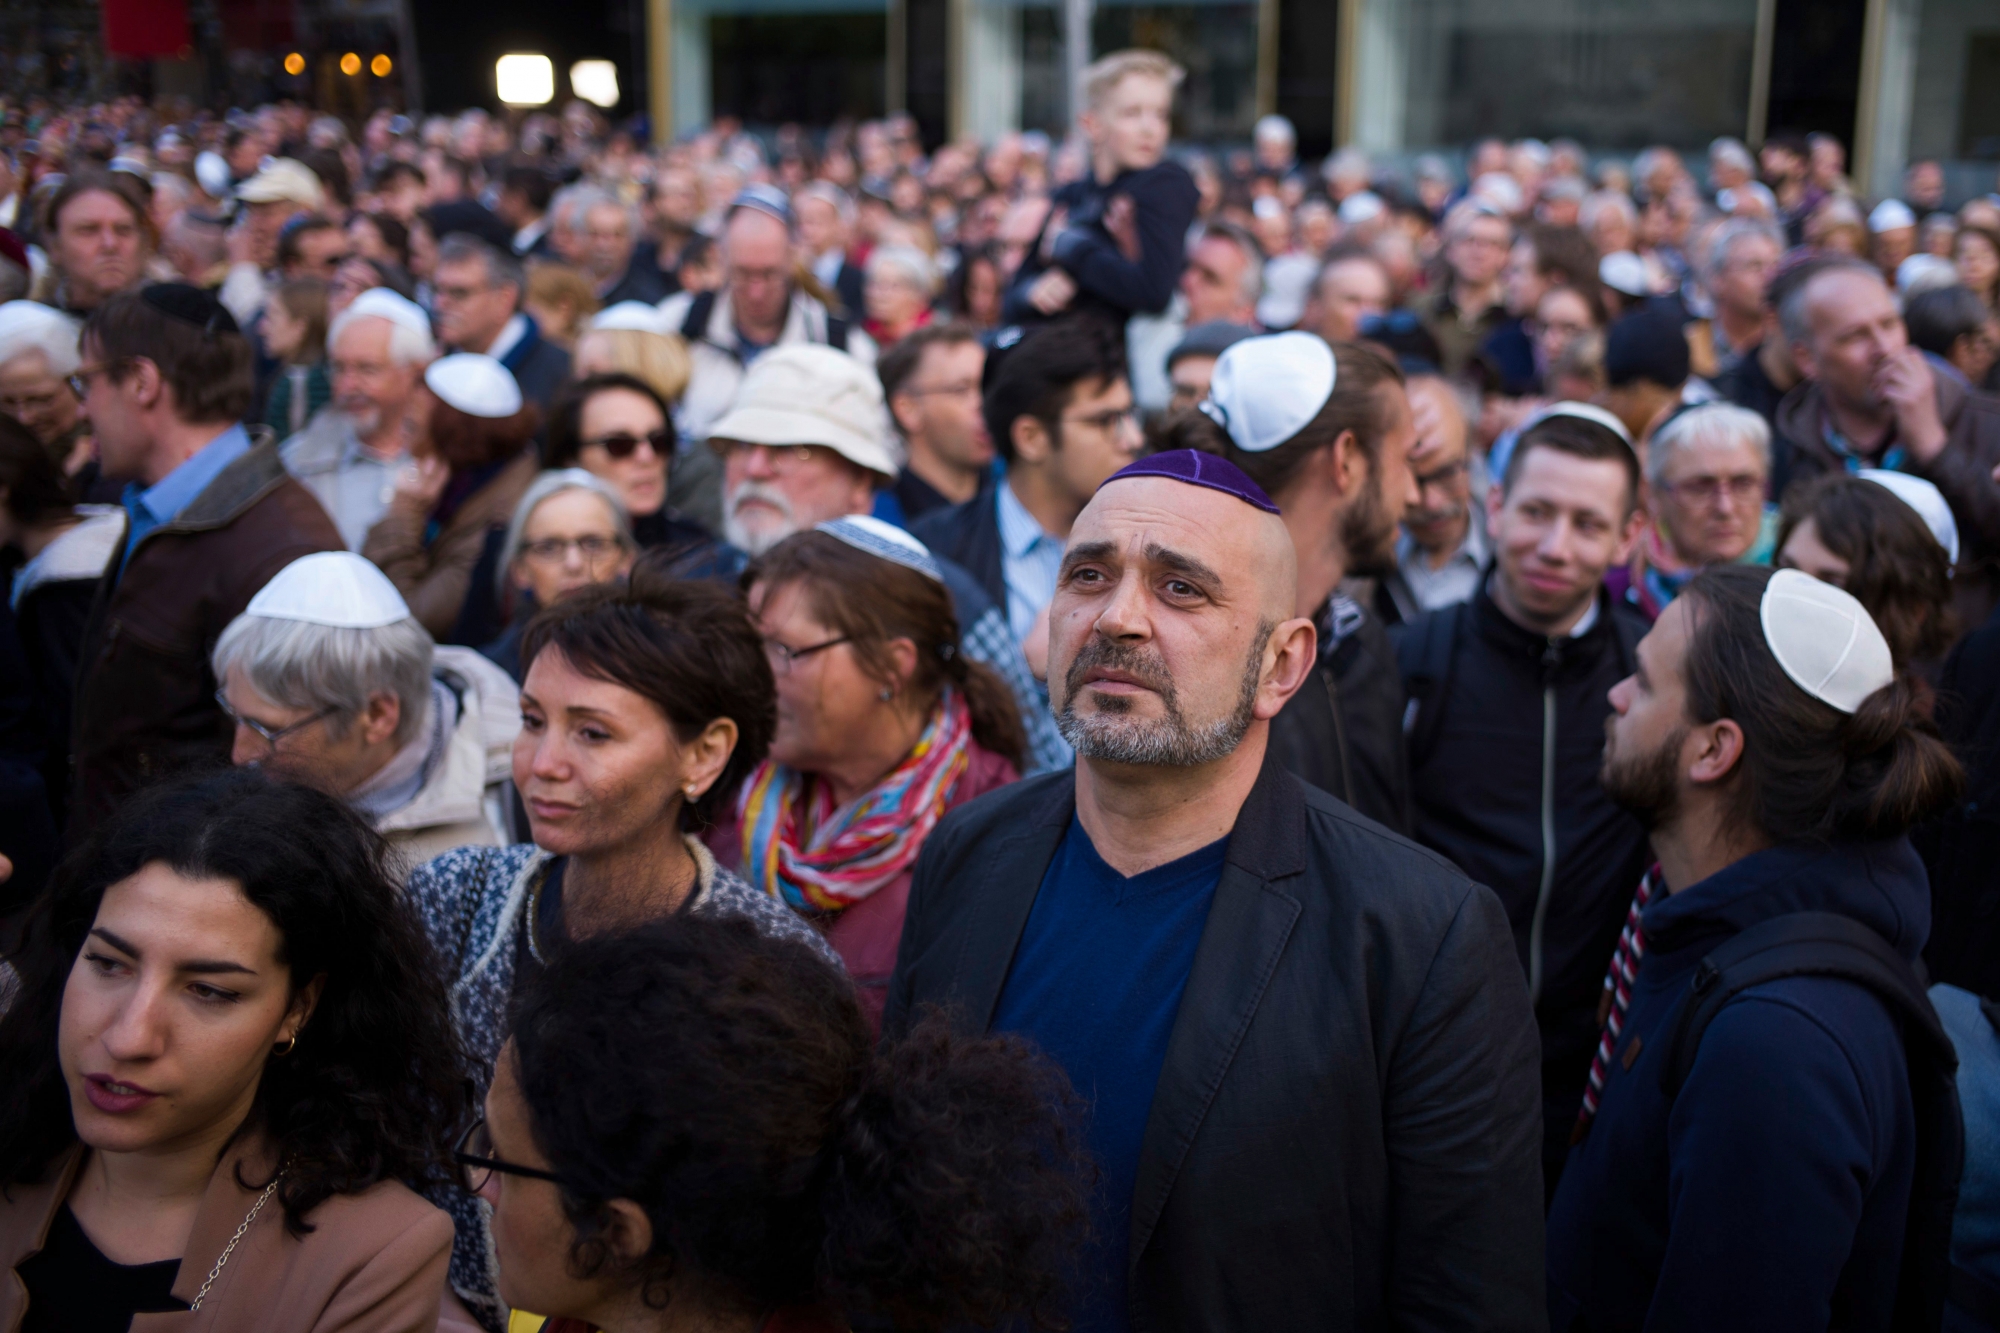 People wear Jewish skullcaps, during a demonstration against anti-Semitism in Berlin, Wednesday, April 25, 2018. (AP Photo/Markus Schreiber) Germany Anti Semitism